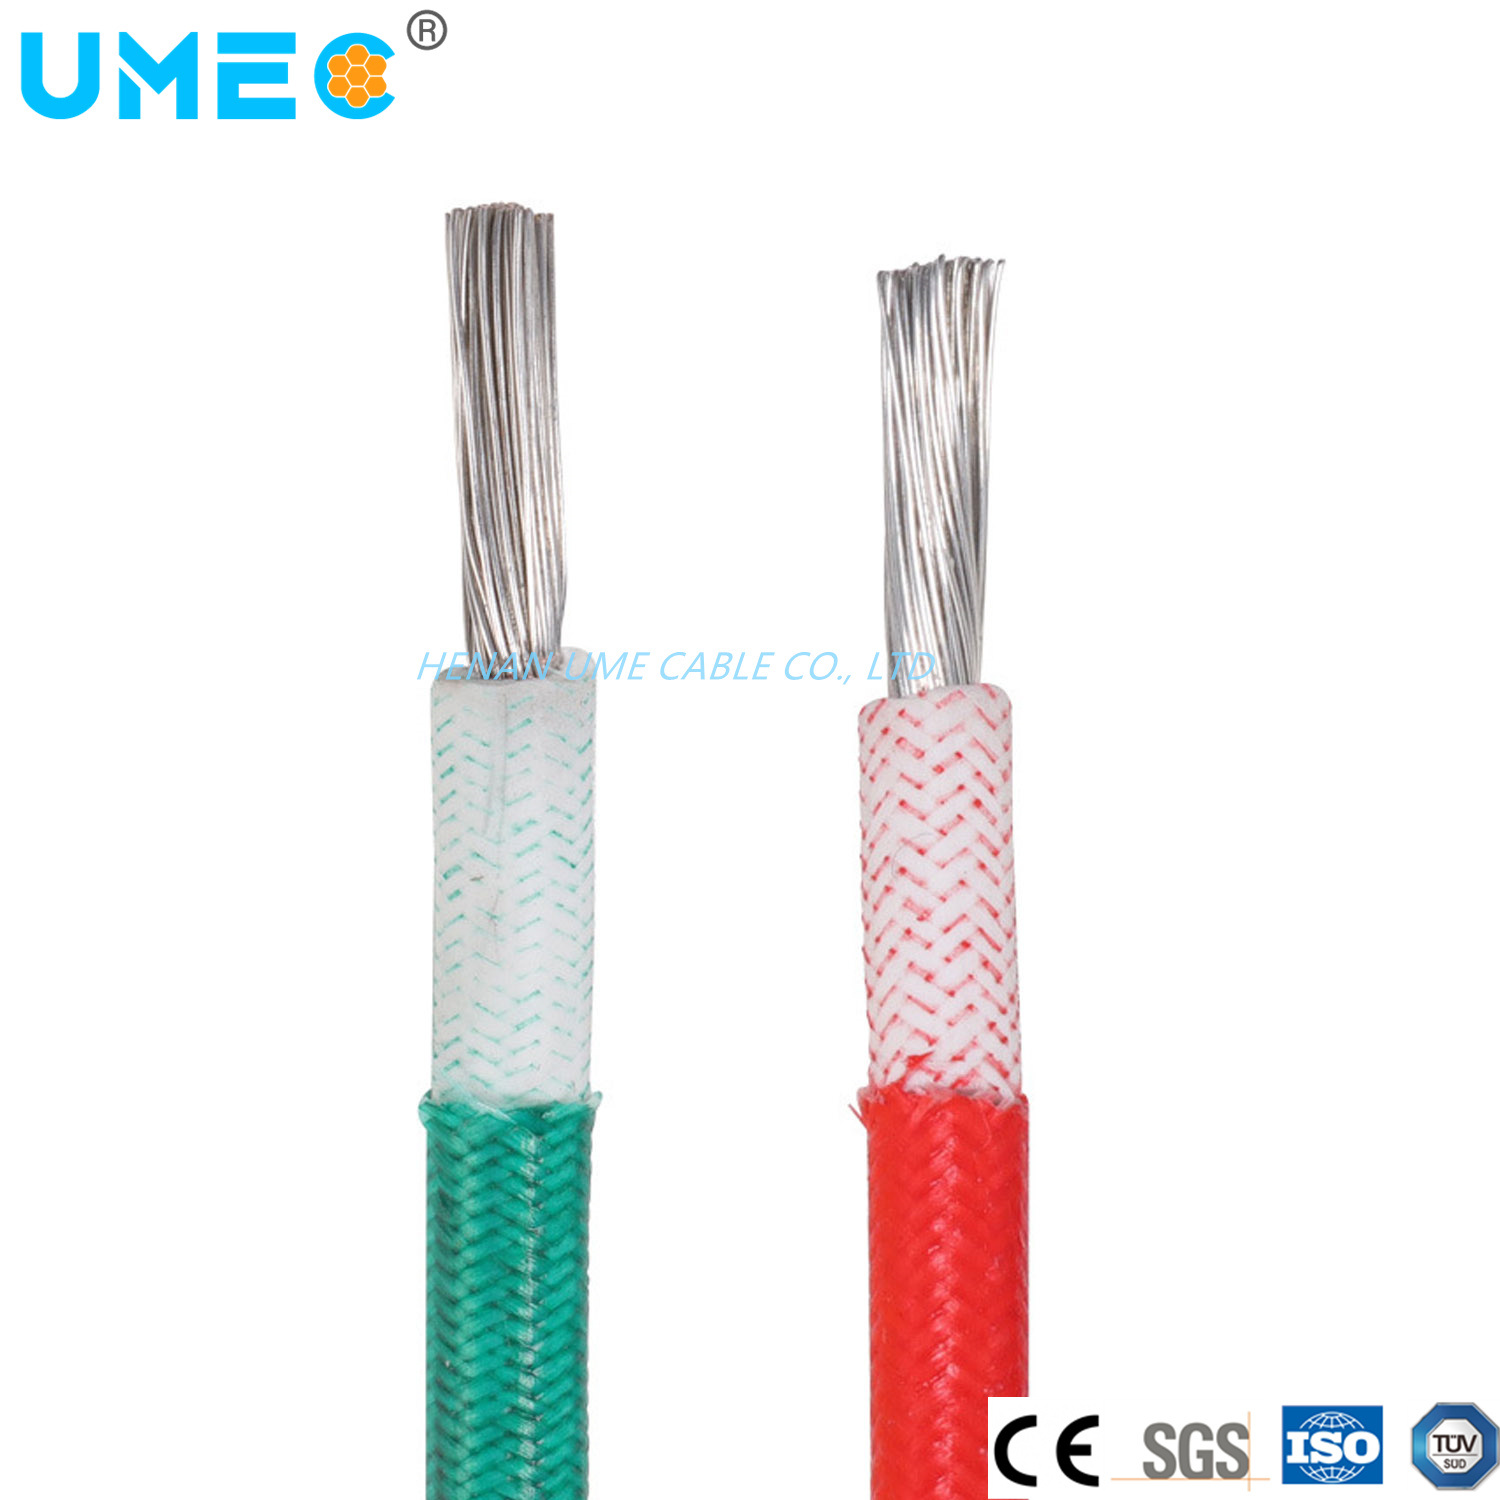 Agrp Fiberglass Braided Silicon Rubber Cable 300V 200c Insulated Tinned Copper Conductor Wire